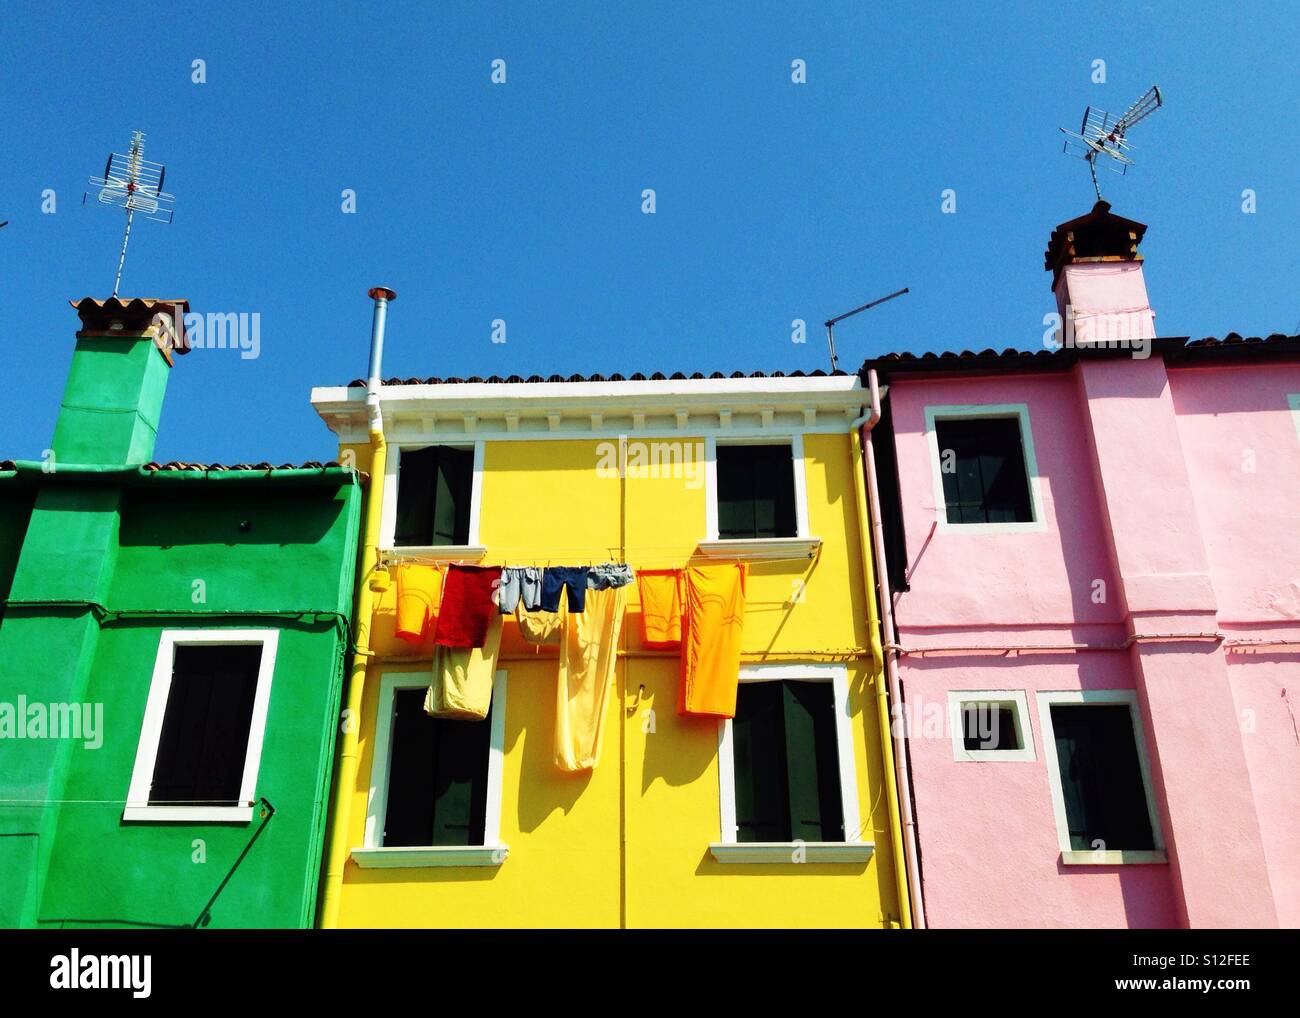 Hung out to dry: washing on the line outside a row of old, brightly painted houses in the popular tourist day trip destination of Burrano, the Benetian island famous for lace-making. Stock Photo